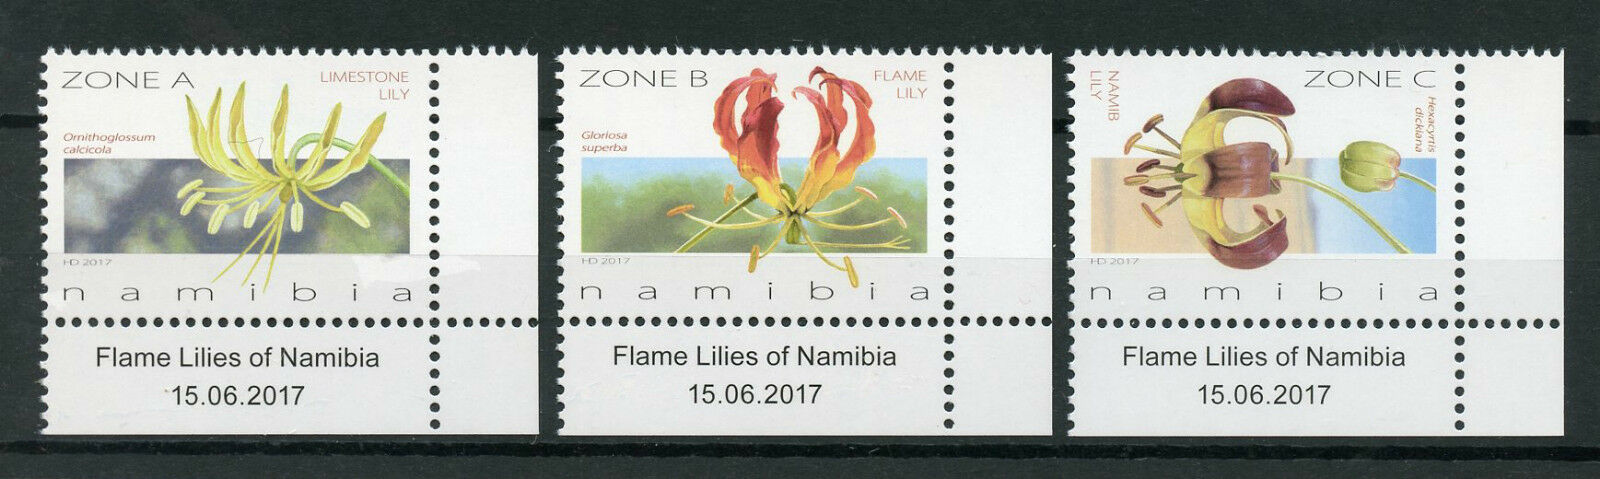 Namibia 2017 MNH Flowers Stamps Flame Lilies Lily Flora 3v Set